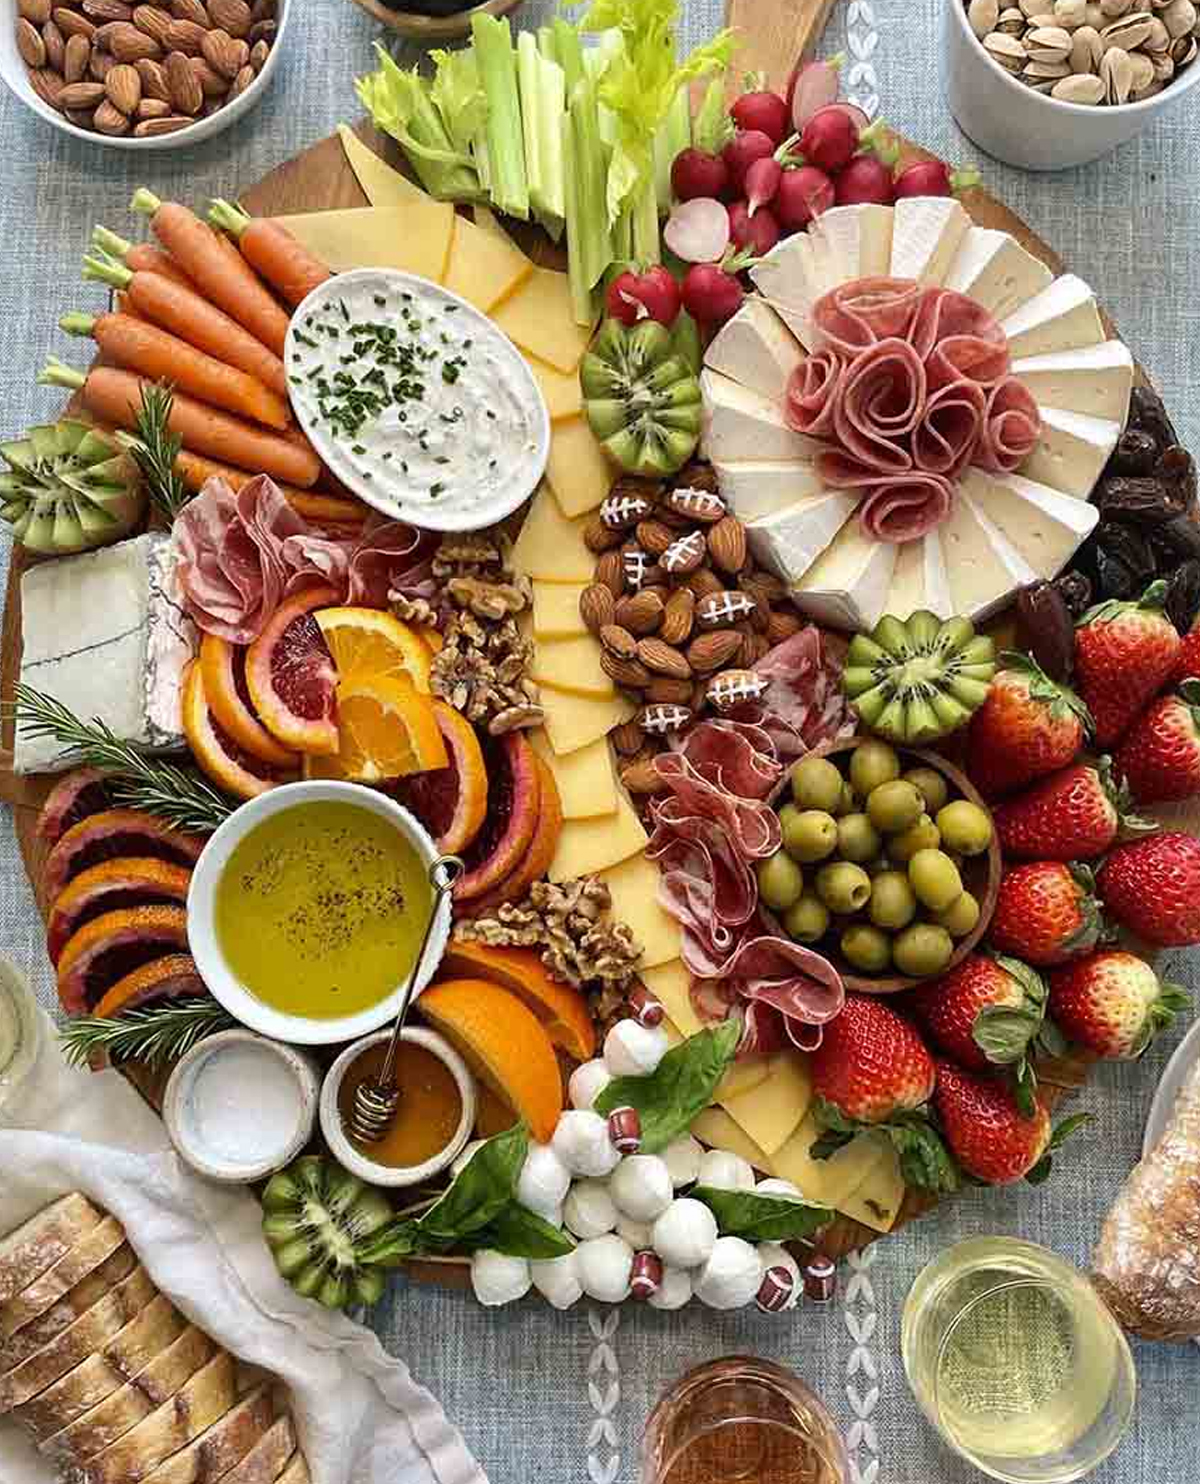 Ain't Too Proud To Meg's board showcases meats, cheese, veggies, nuts, and fruit.